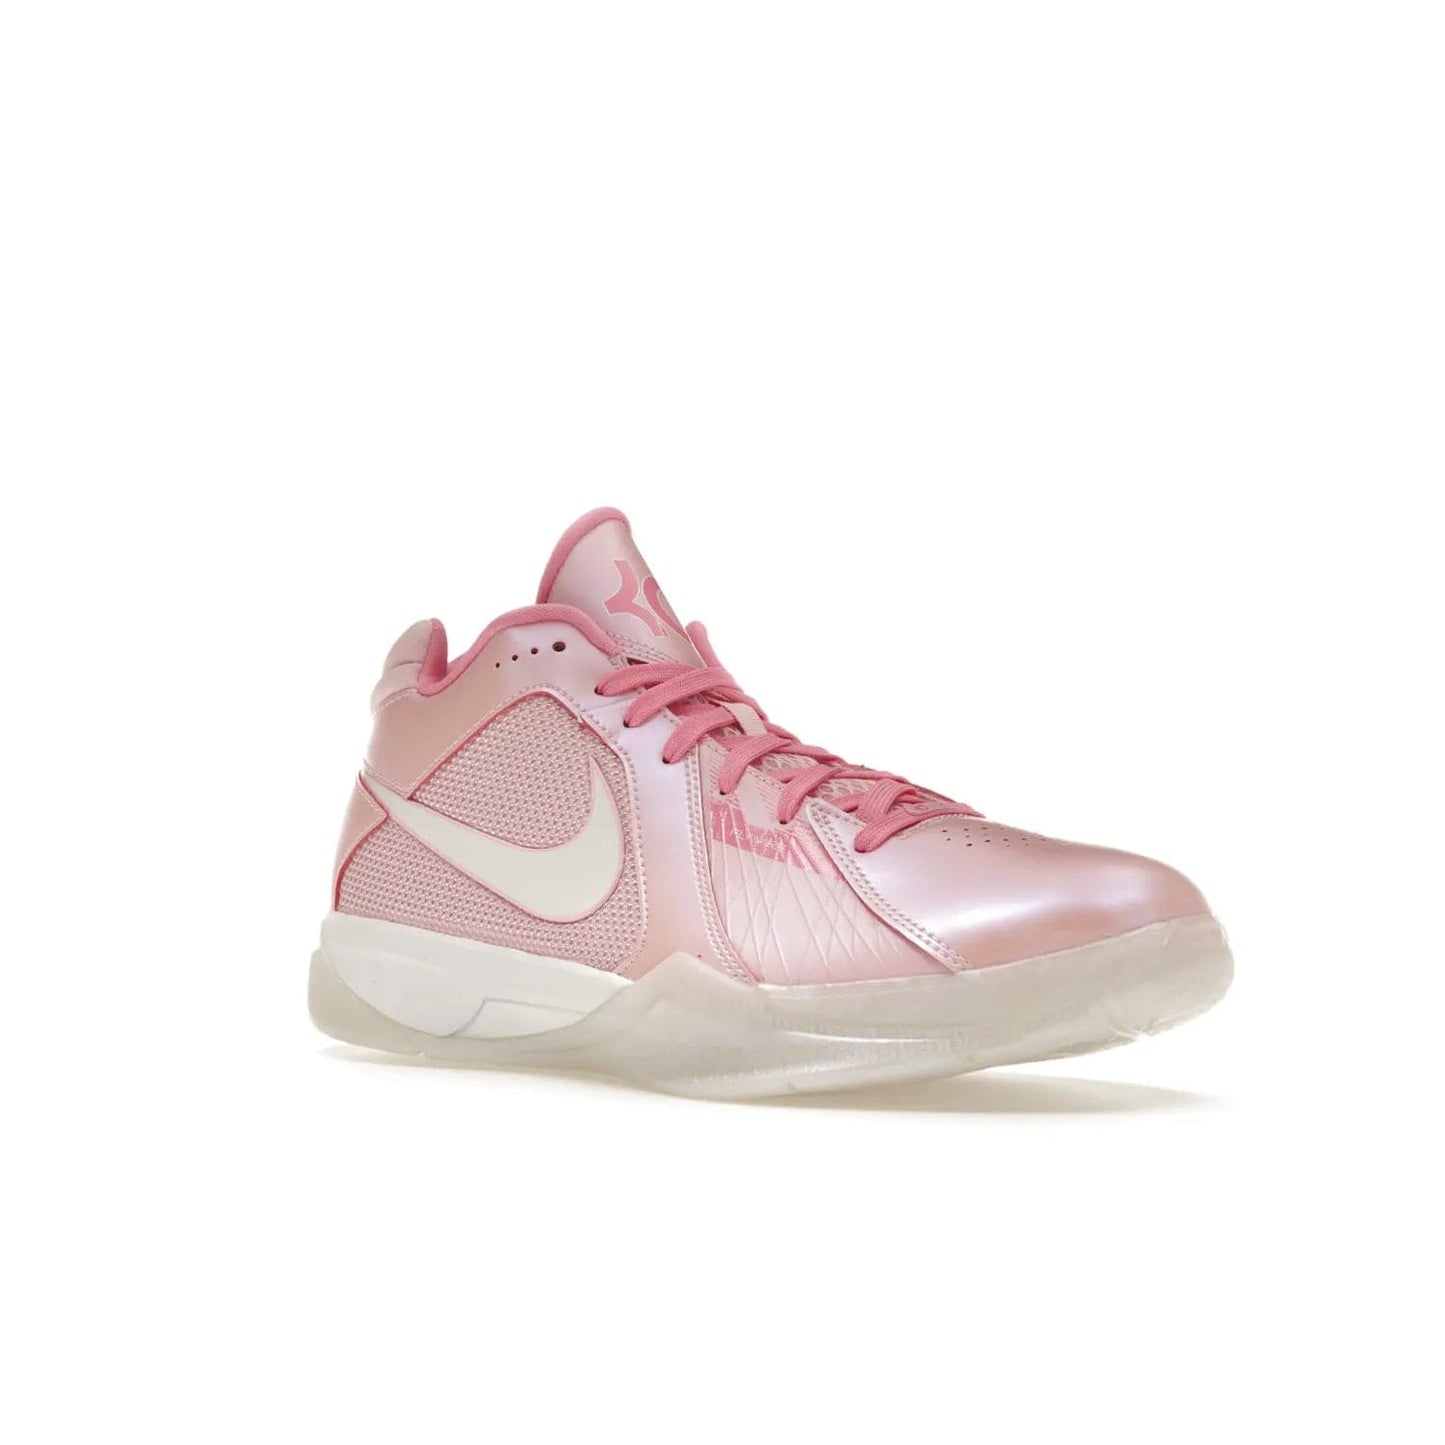 Nike KD 3 Aunt Pearl - Image 5 - Only at www.BallersClubKickz.com - Introducing the Nike KD 3 Aunt Pearl. Featuring a bold Medium Soft Pink, White, & Lotus Pink colorway. Get ready to stand out this October 15th.